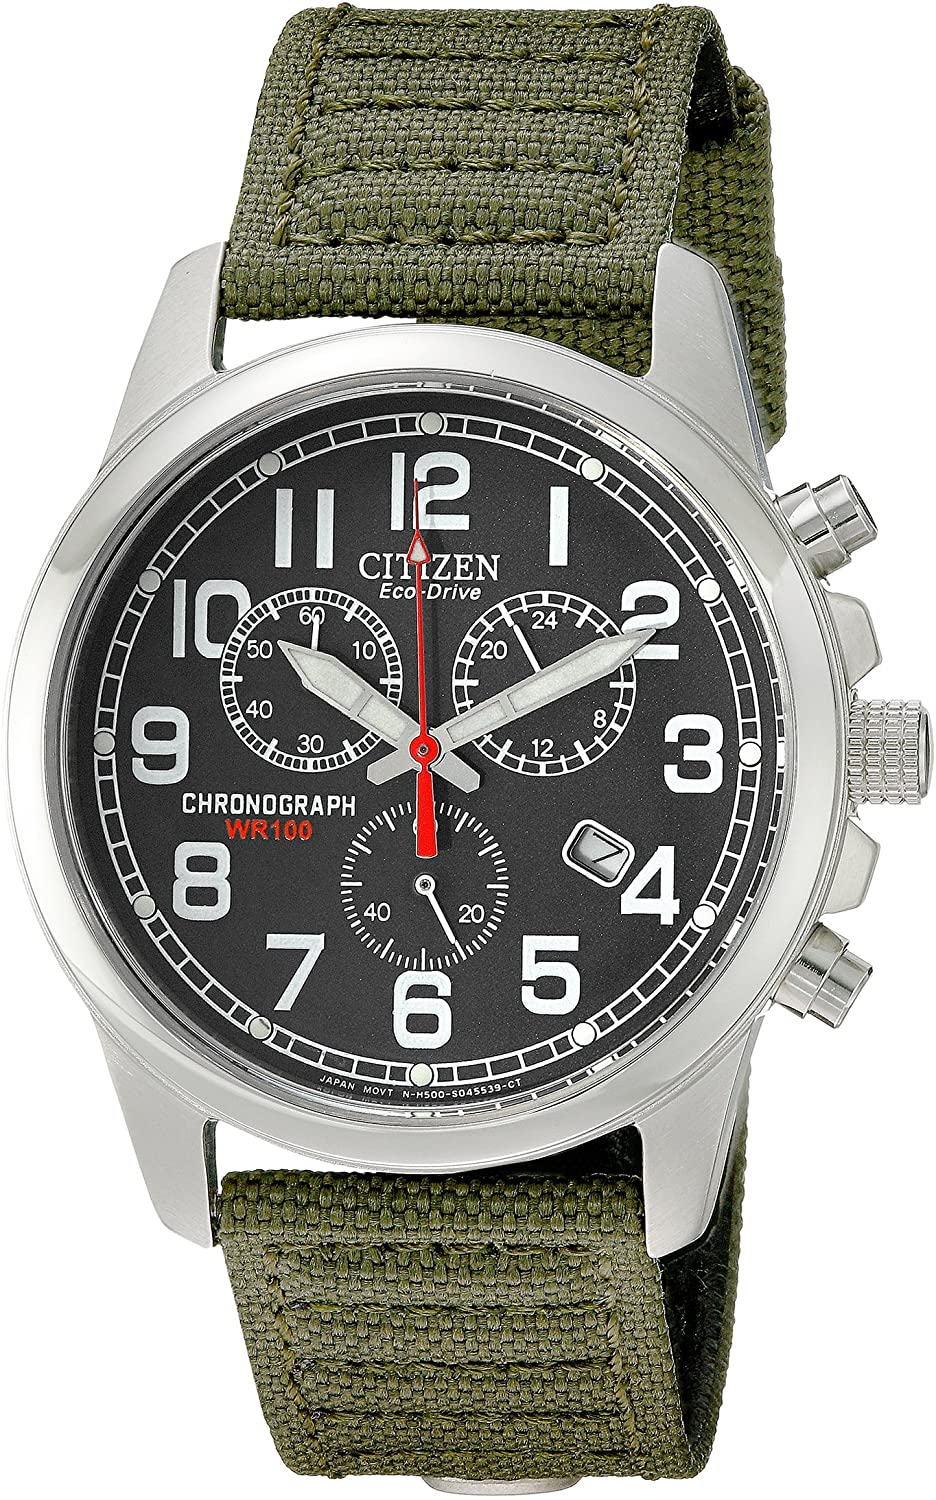 Citizen Men's Military Eco-Drive Chronograph Watches Article